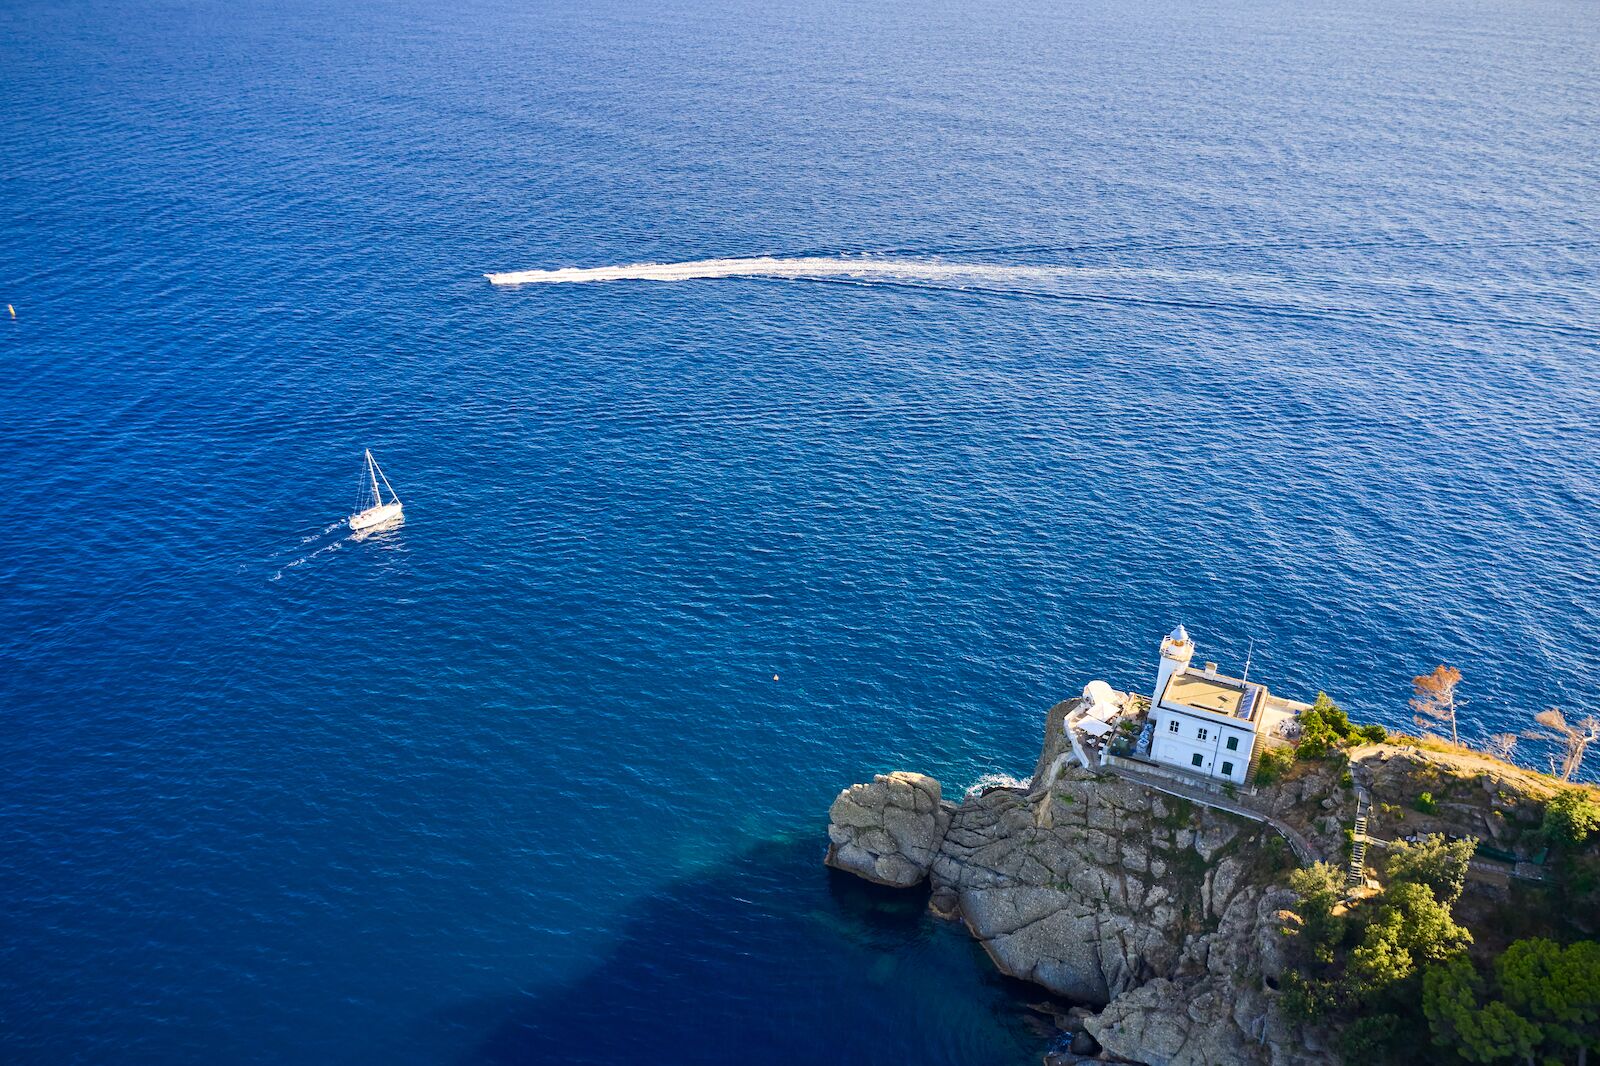 White yacht and motor boat are sailing near a light house in Portofino, Italy. A lighthouse is located on the hill near a seaside.